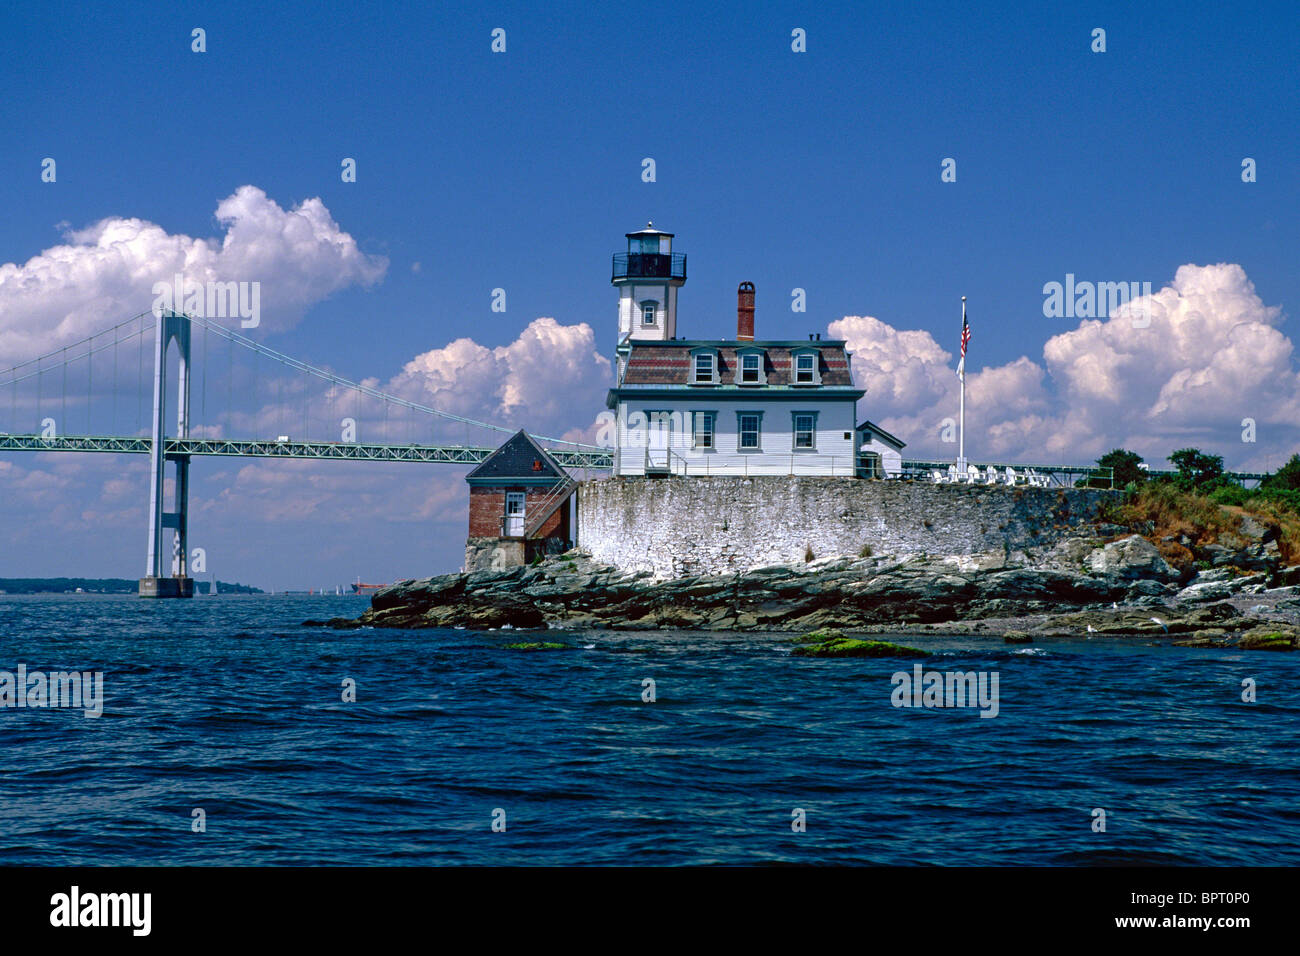 Low Angle View of the Rose Island Lighthouse, Newport, Rhode Island Stock Photo